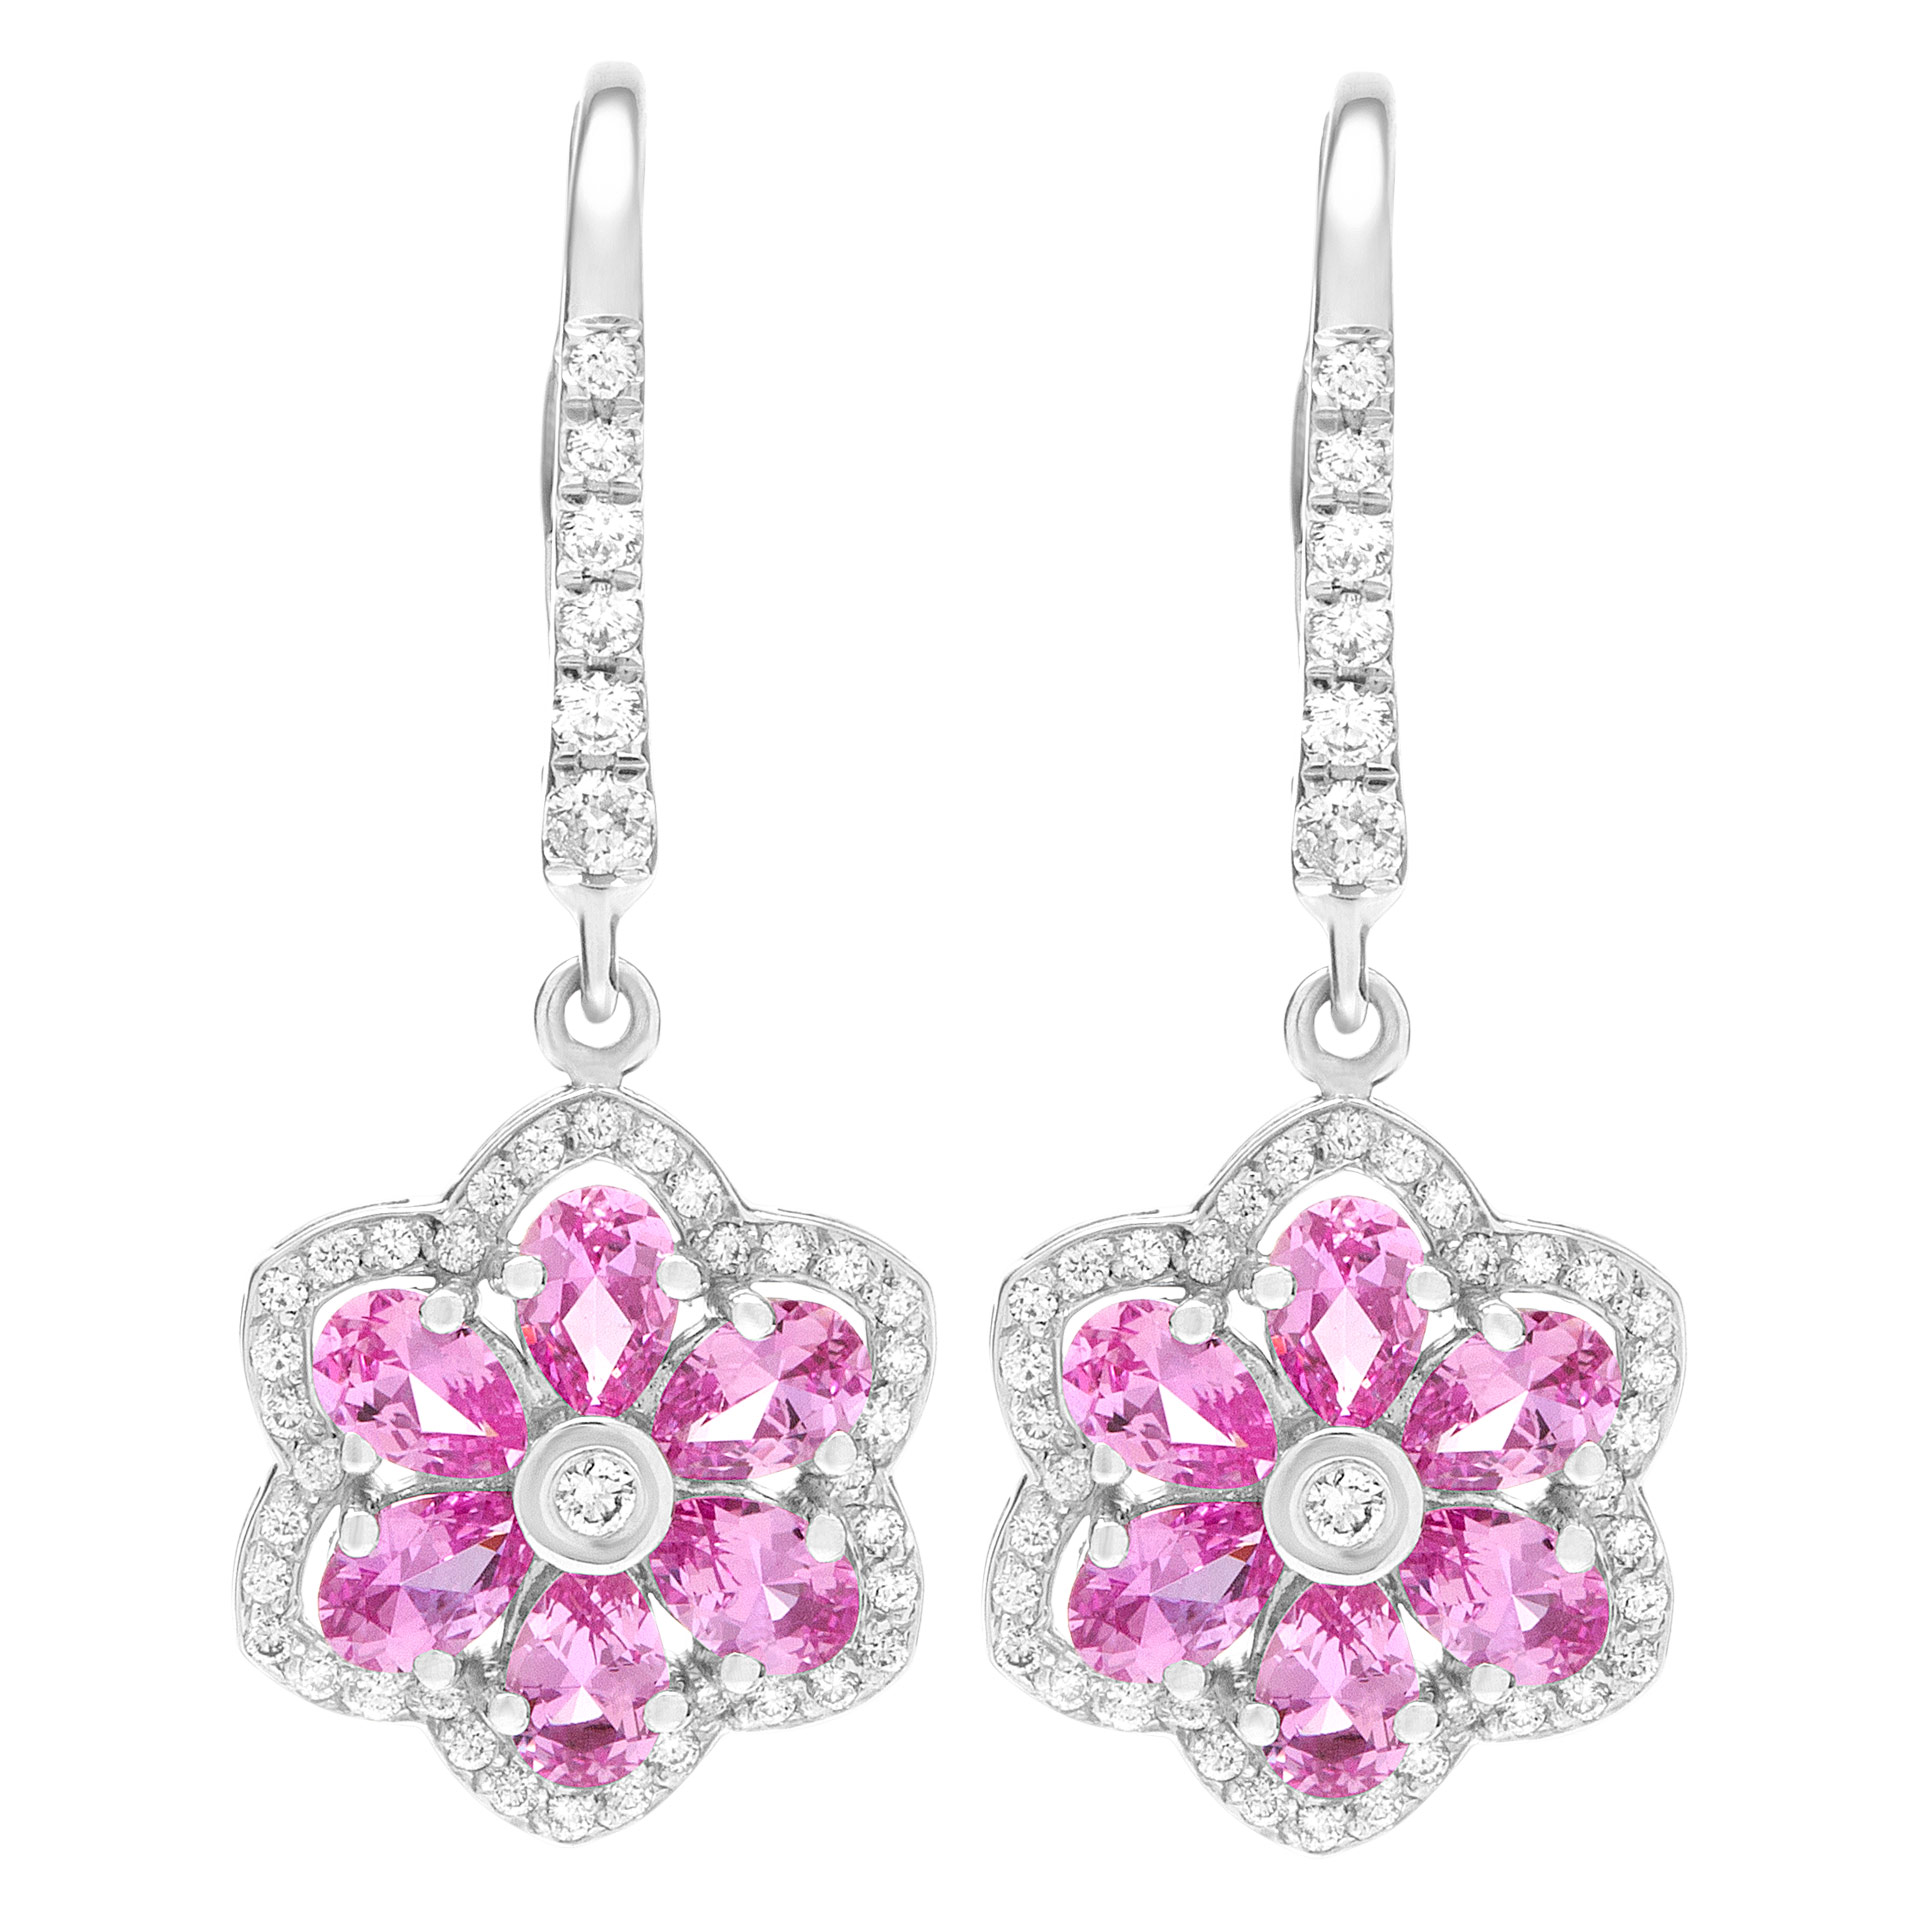 Sweet flower earrings with 2.26 cts pink sapphires with 0.51 cts in diamonds set in 18k white gold image 1